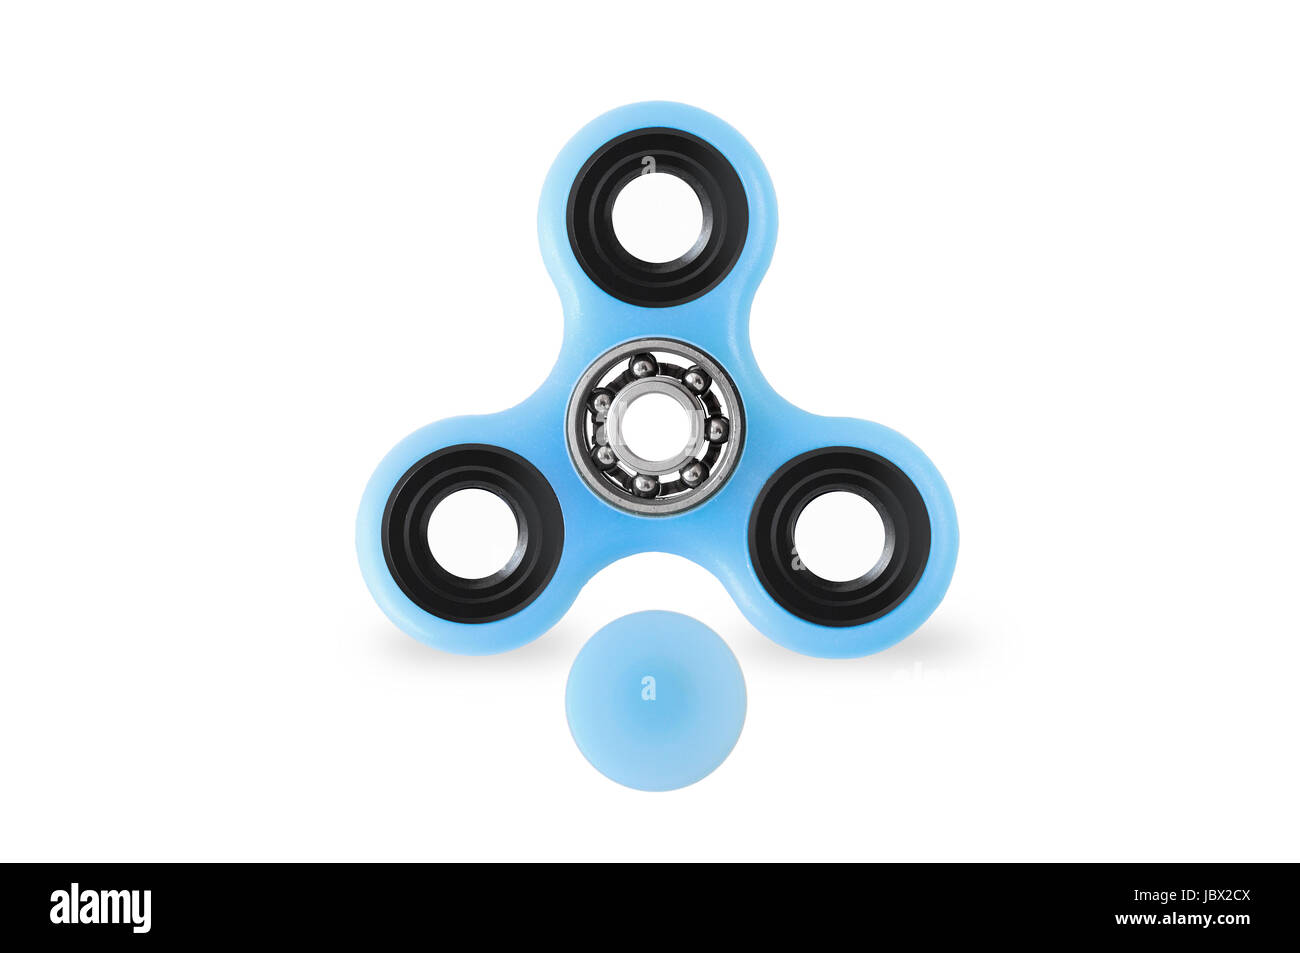 Blue fidget spinner popular toy on white background with opened cap, mechanism visible Stock Photo